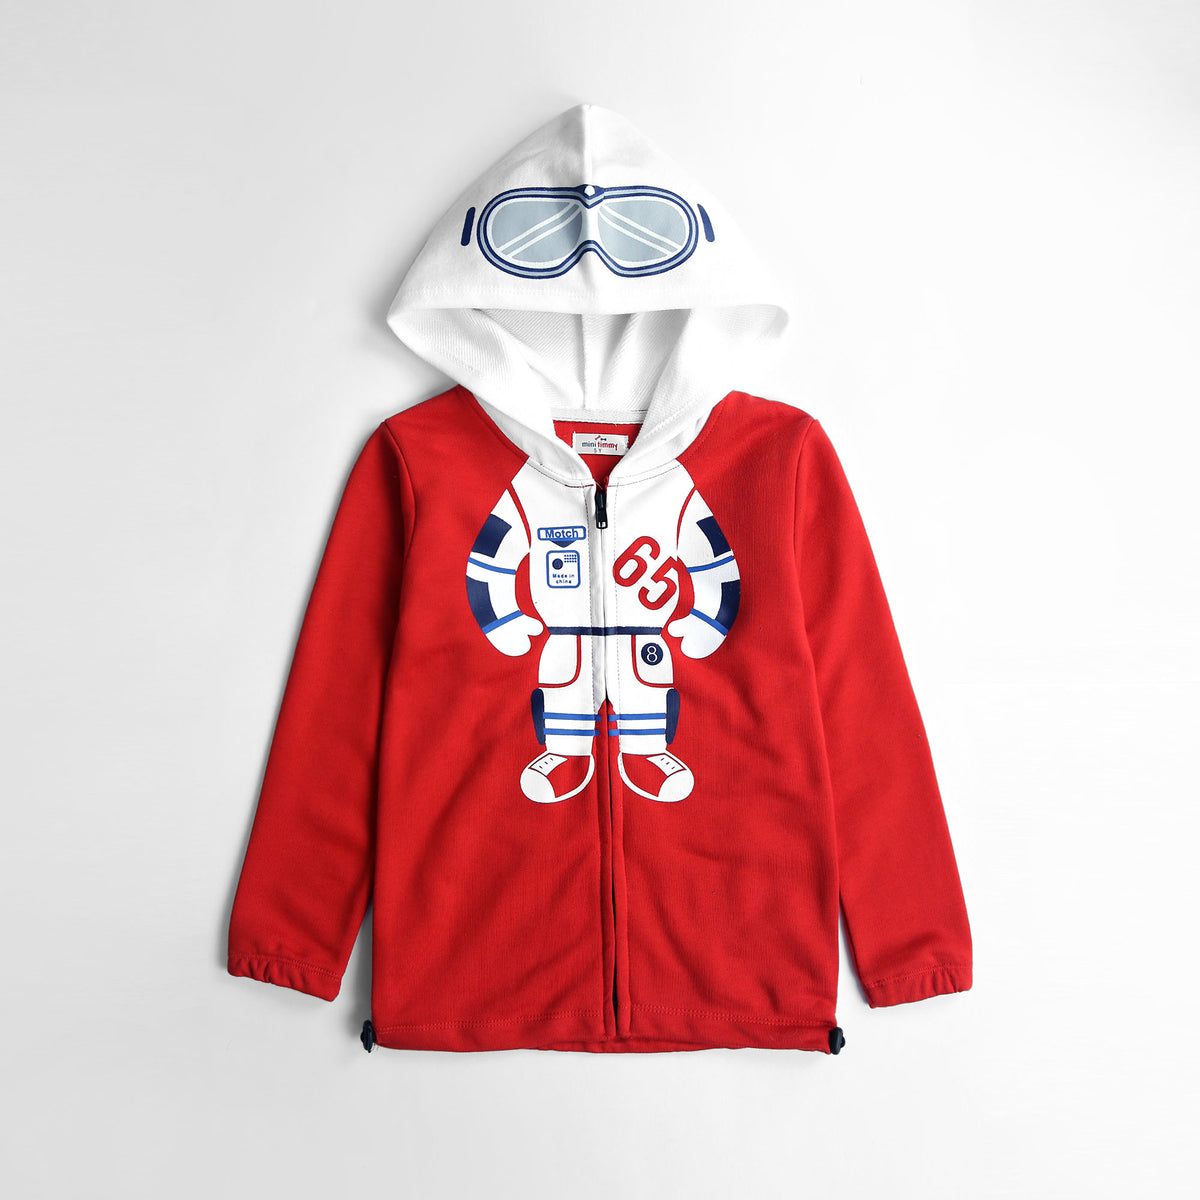 Kids Animated Printed Soft Cotton Red Terry Zipper Hoodie